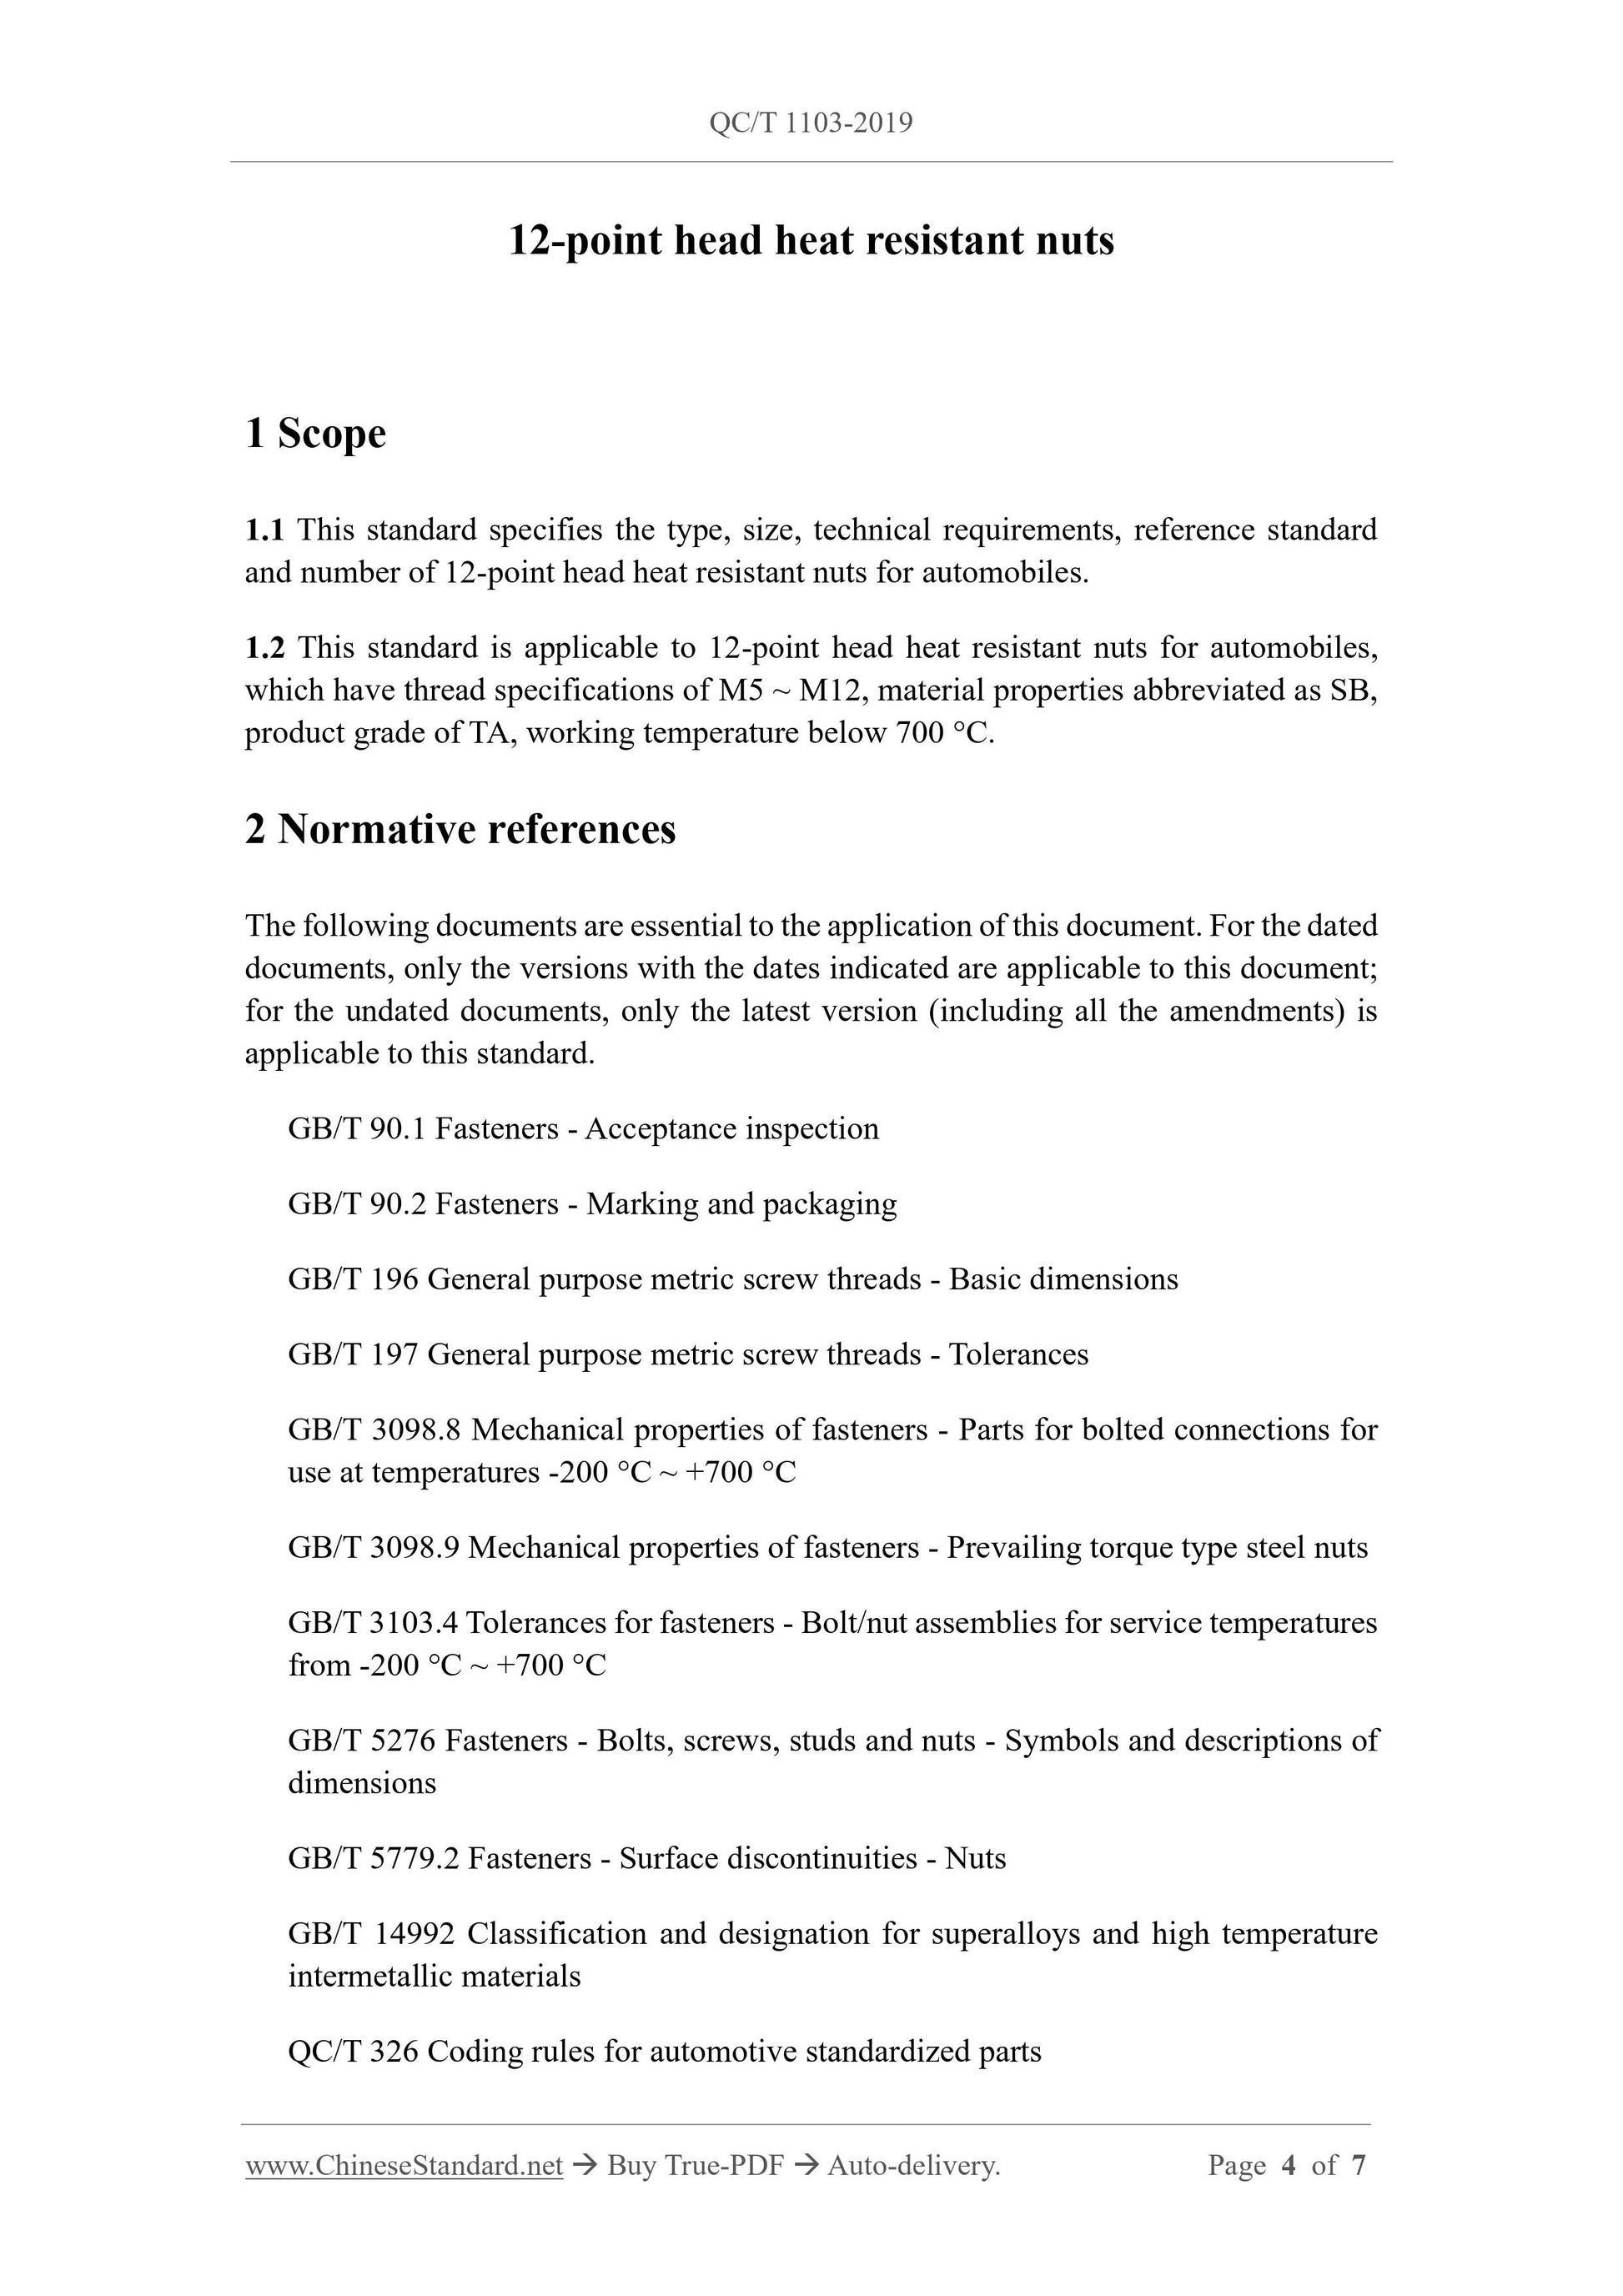 QC/T 1103-2019 Page 4